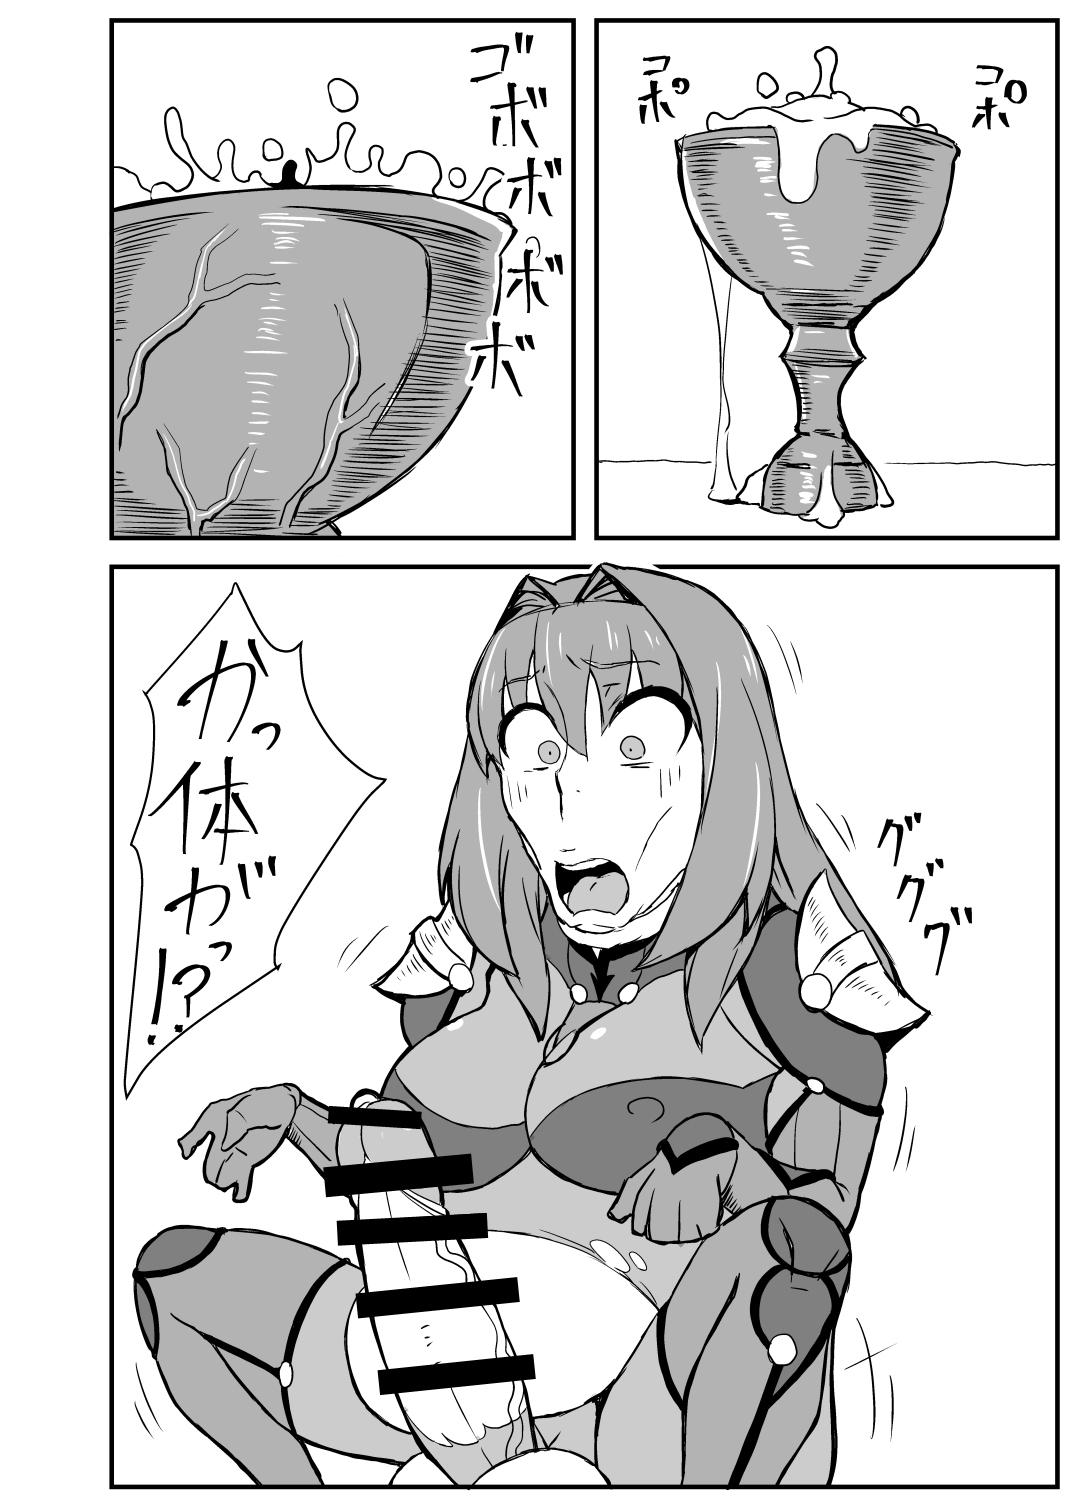 Tiny Titties Queen's Stallion Chaldea - Fate grand order Screaming - Page 9